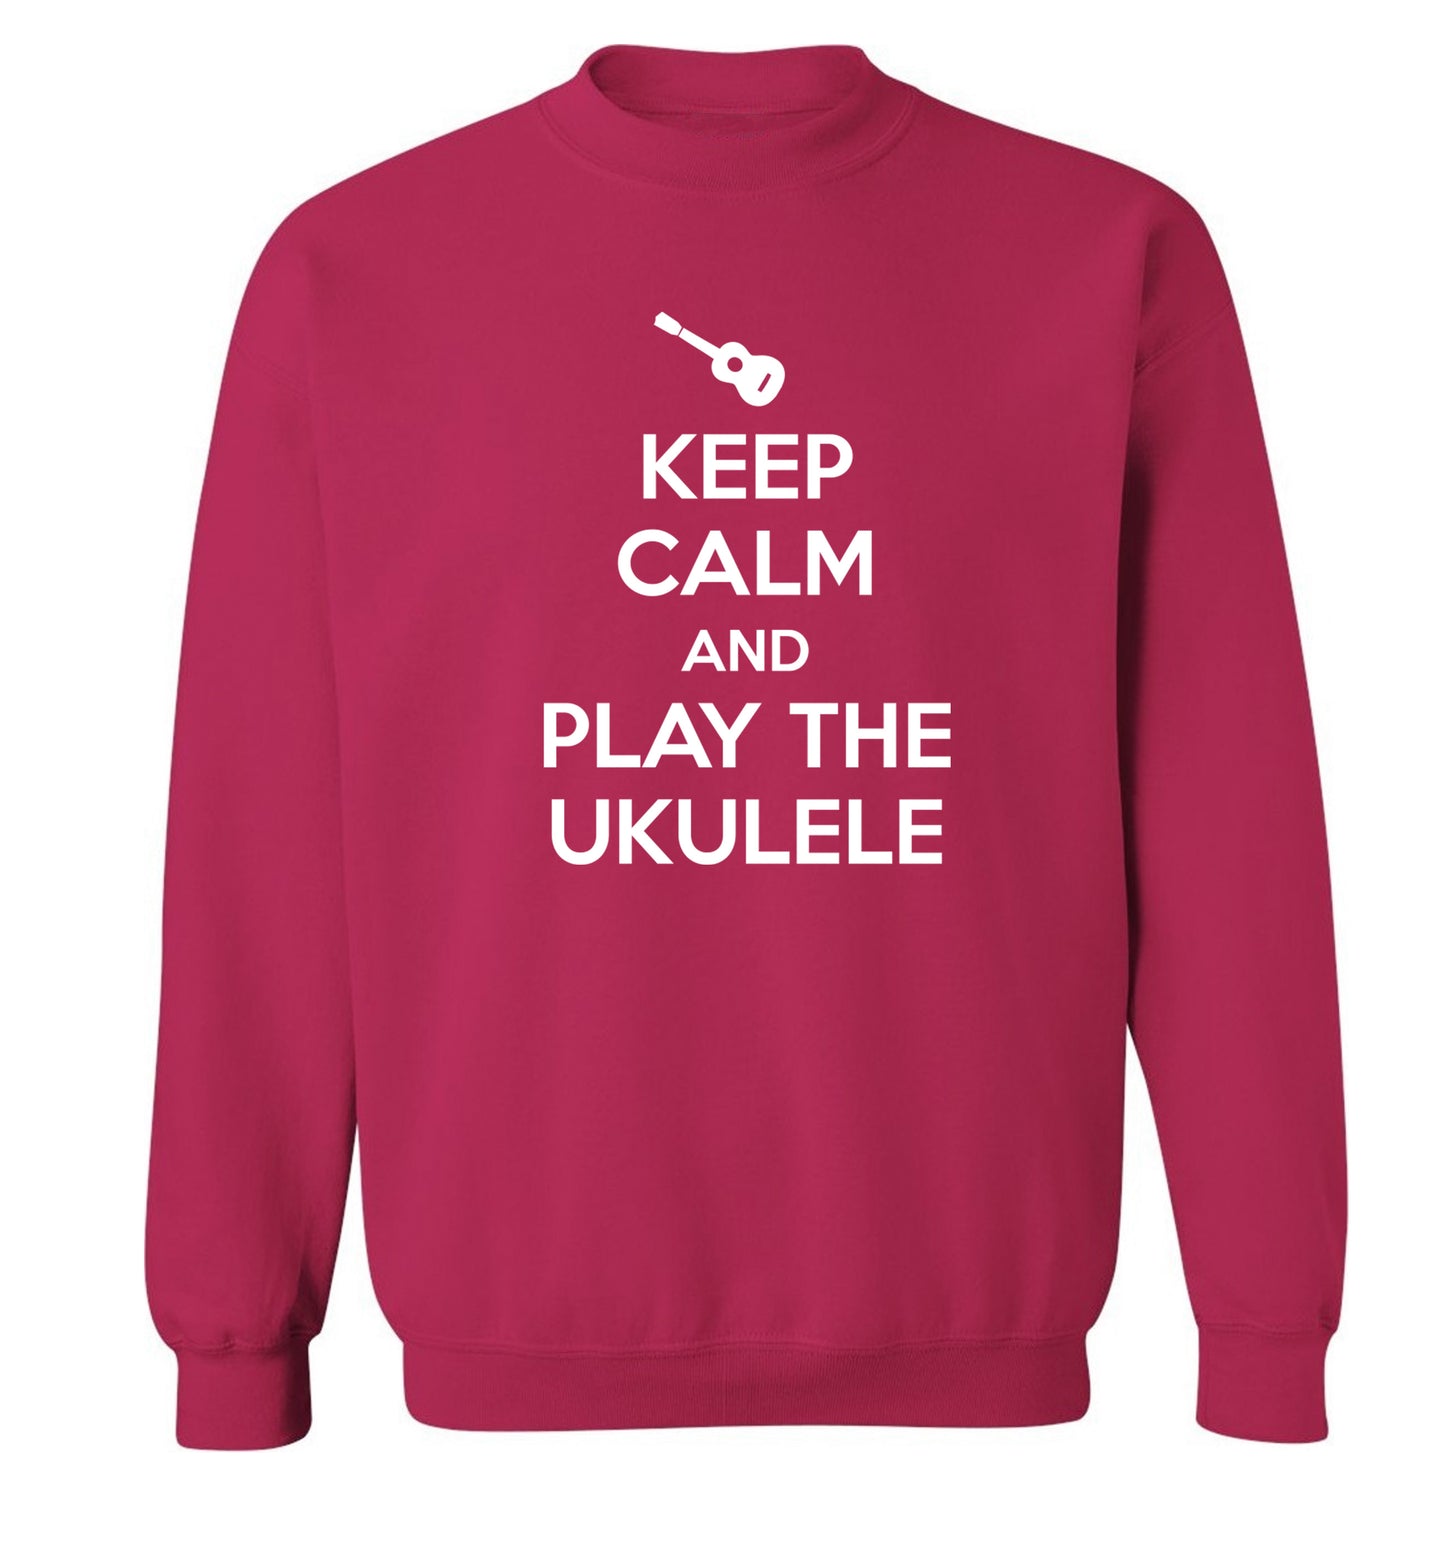 Keep calm and play the ukulele Adult's unisex pink Sweater 2XL